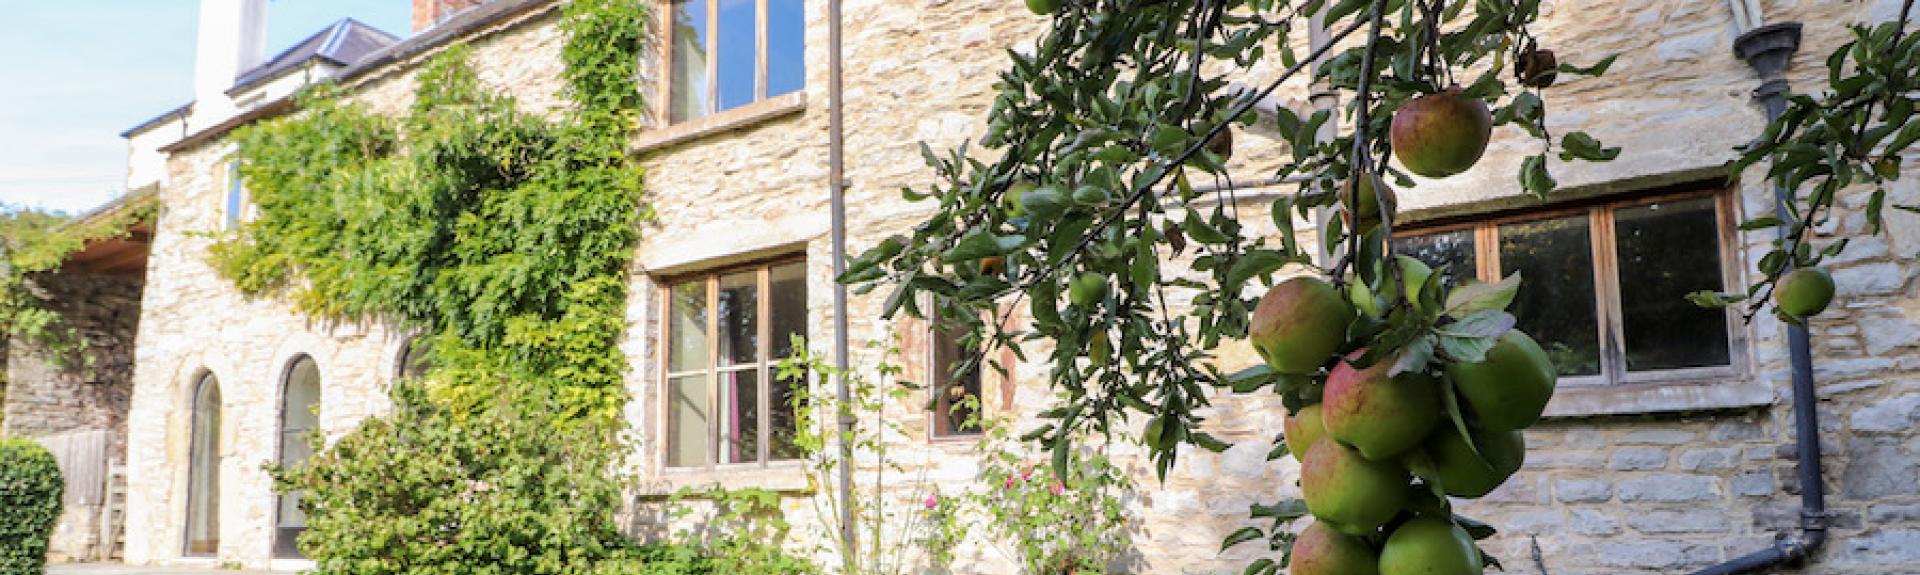 Exterior of a long, stone built Derbyshire holiday cottage overlooking a garden with mature tree.